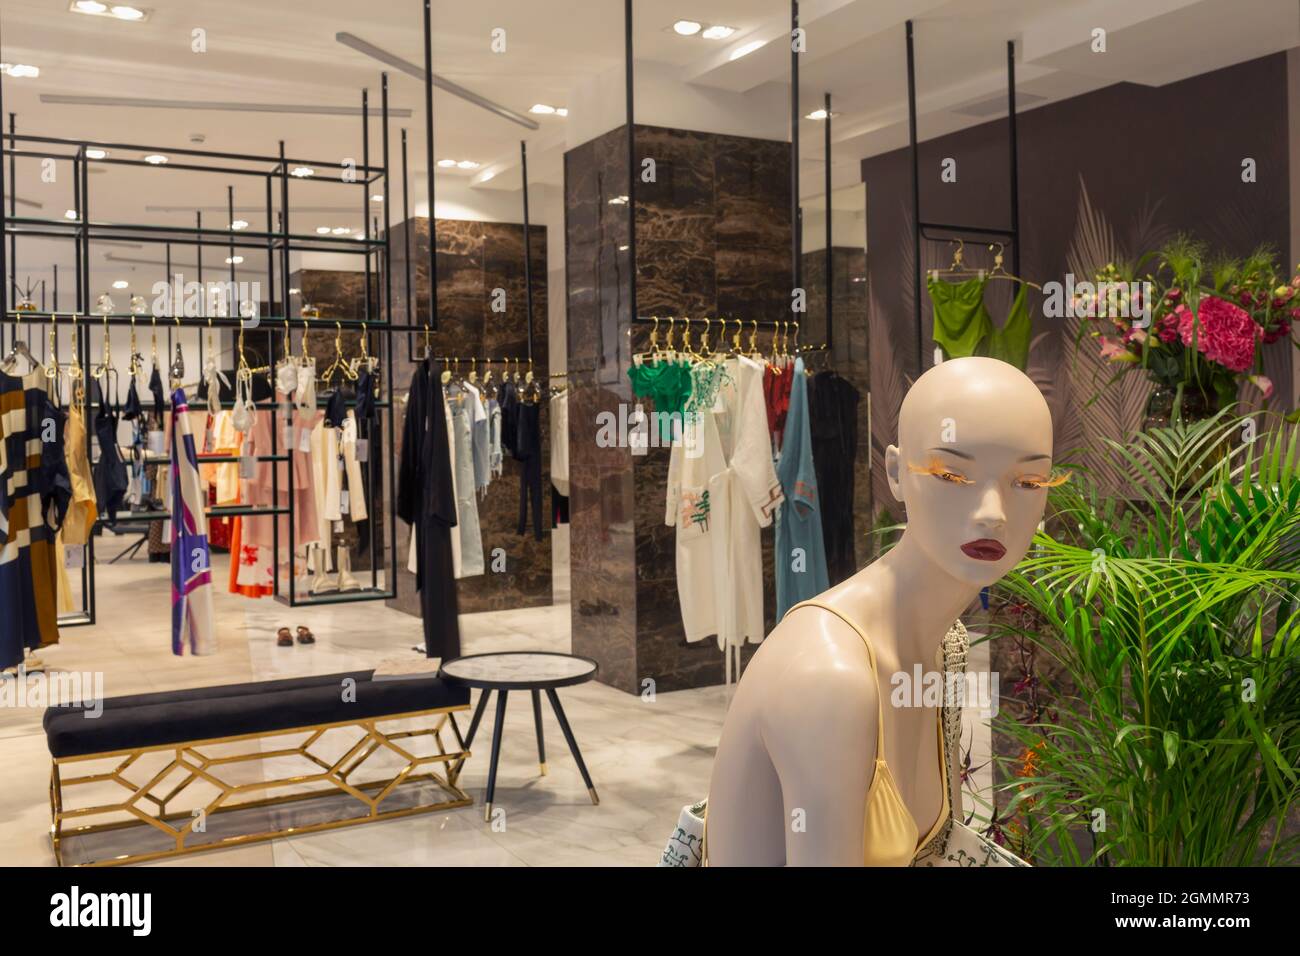 Mannequin and clothing in department store Stock Photo